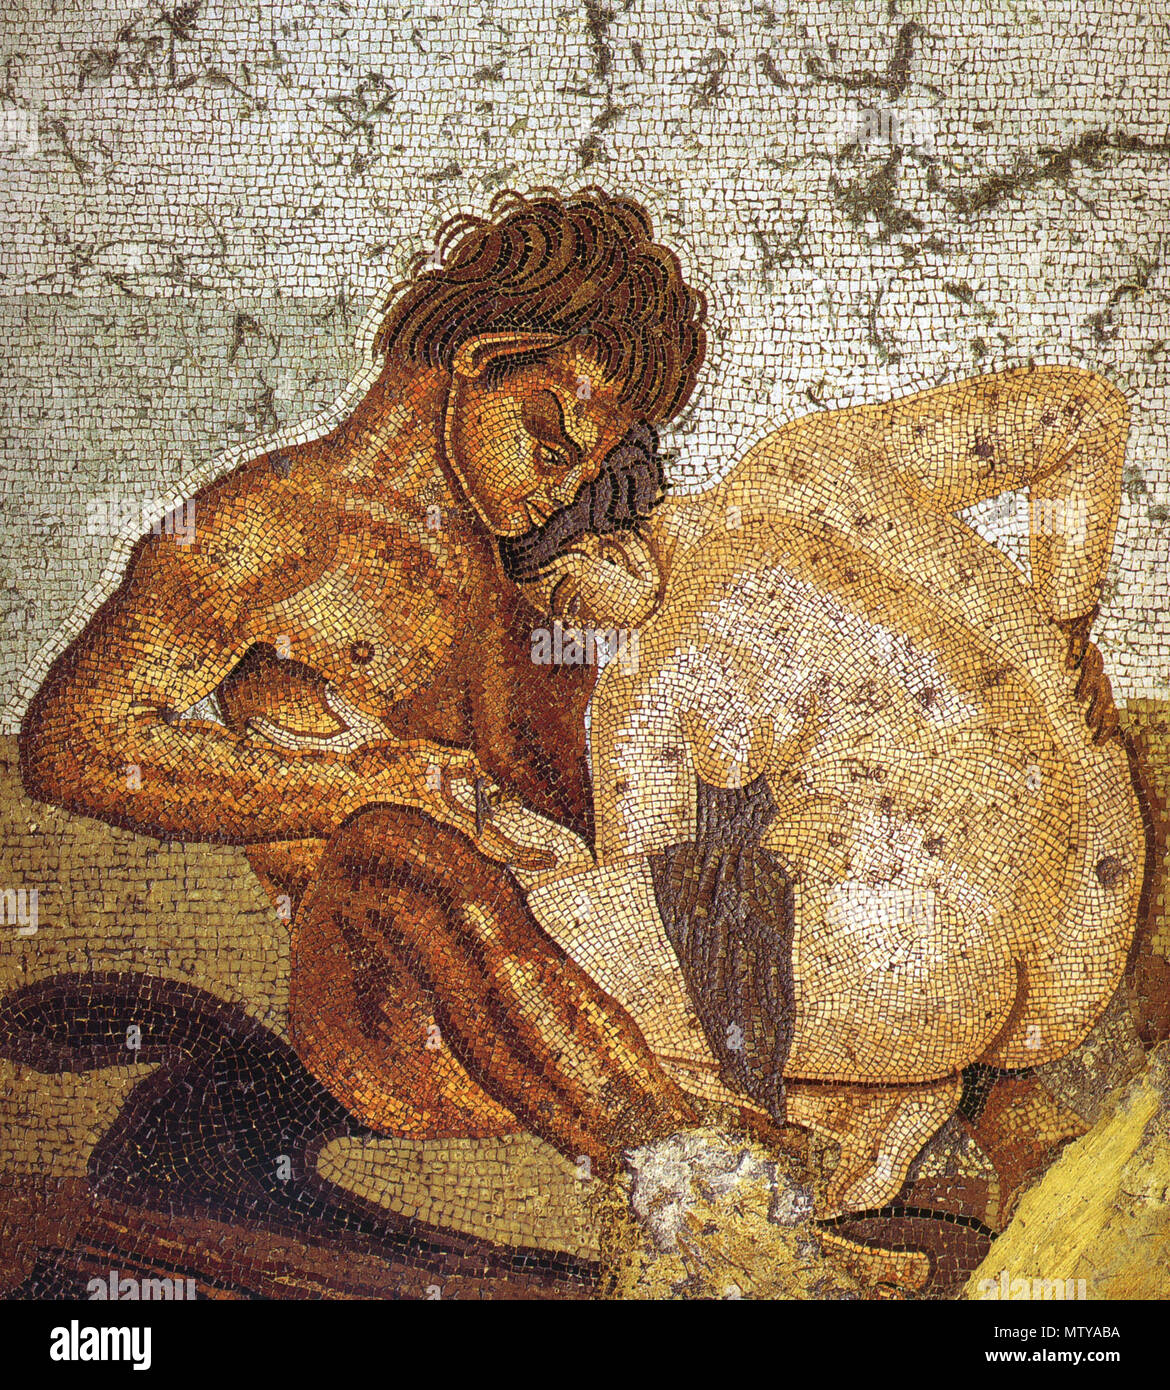 . English: Satyr and nymph. Roman mosaic from the cubiculum in the Casa del Fauno (VI 12, 2-5) in Pompeii. Museo Archeologico Nazionale (Naples), inv. nr. 27707. Deutsch: Satyr und Nymphe. Römisches Mosaik aus dem Cubiculum in der Casa del Fauno (VI 12, 2-5) in Pompeji. Museo Archeologico Nazionale (Neapel), inv. nr. 27707. 13 March 2009. WolfgangRieger 491 Pompeii - Casa del Fauno - Satyr and Nymph - MAN Stock Photo